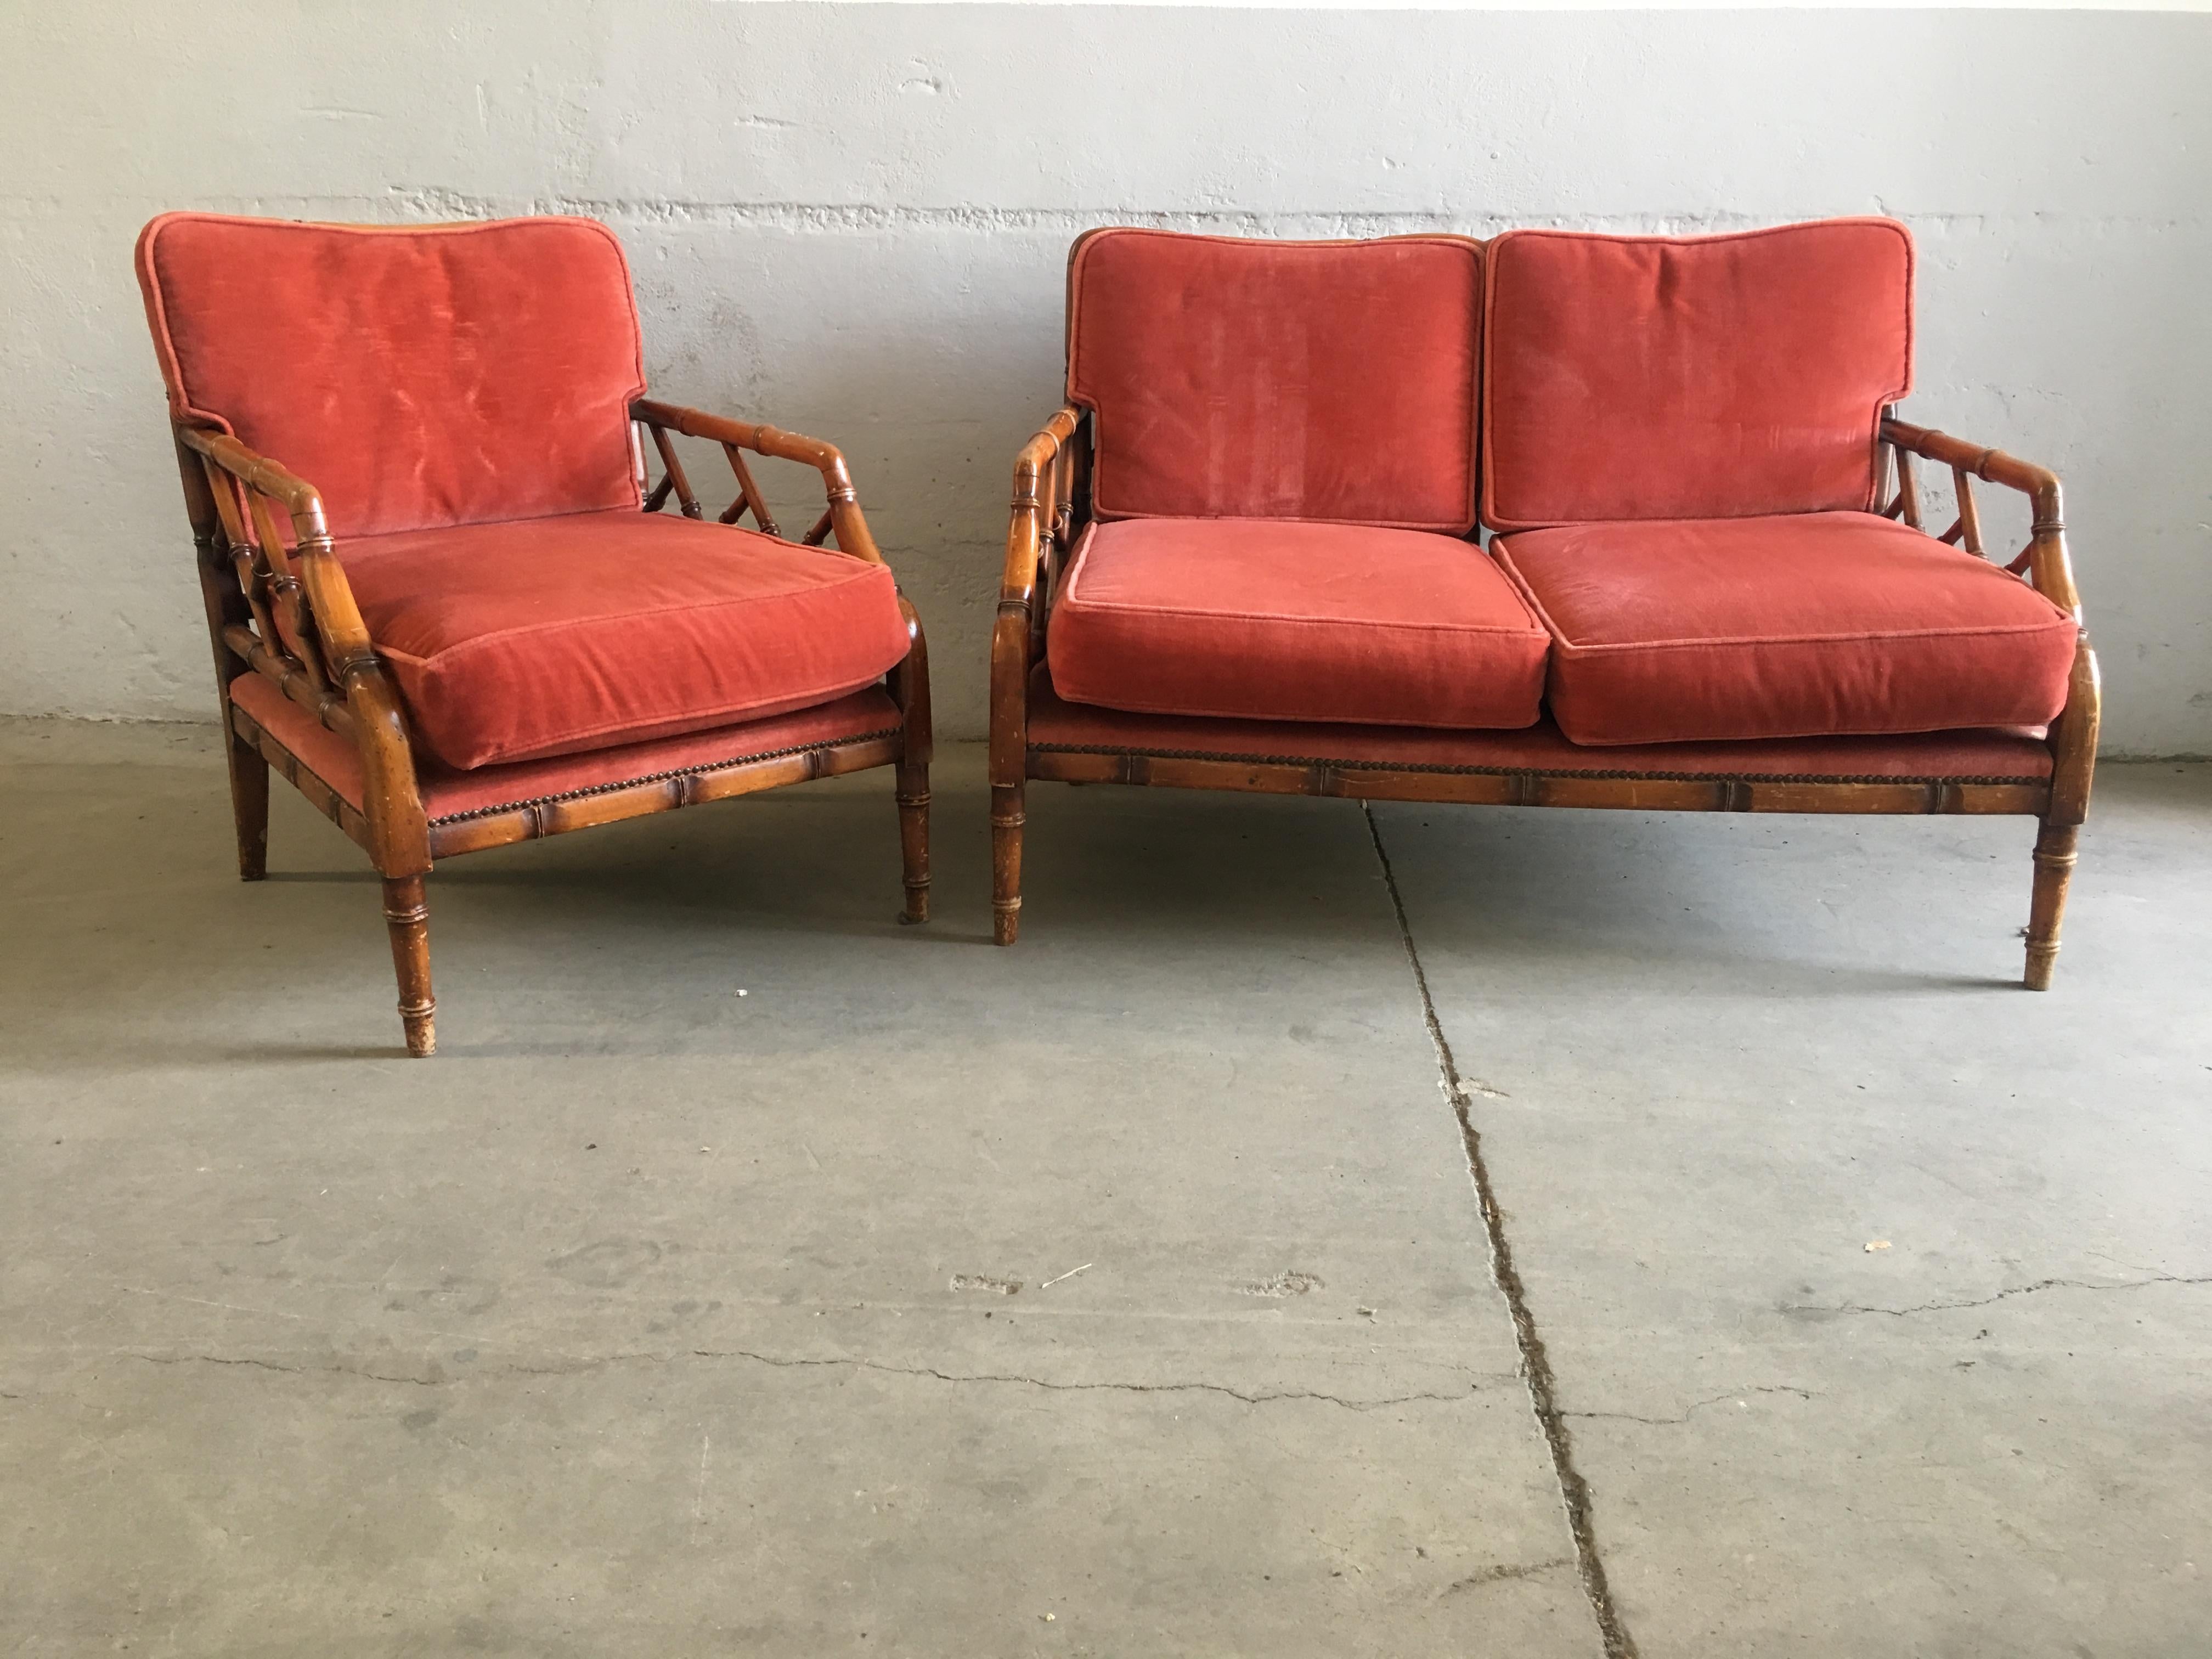 Mid-Century Modern Italian faux bamboo living room set with original upholstery.
The set consists of one two-seat sofa and one armchair
Measurements:
Sofa length cm.115, width cm.65, height cm.77 (seat height cm.44)
Armchair length cm.63, width